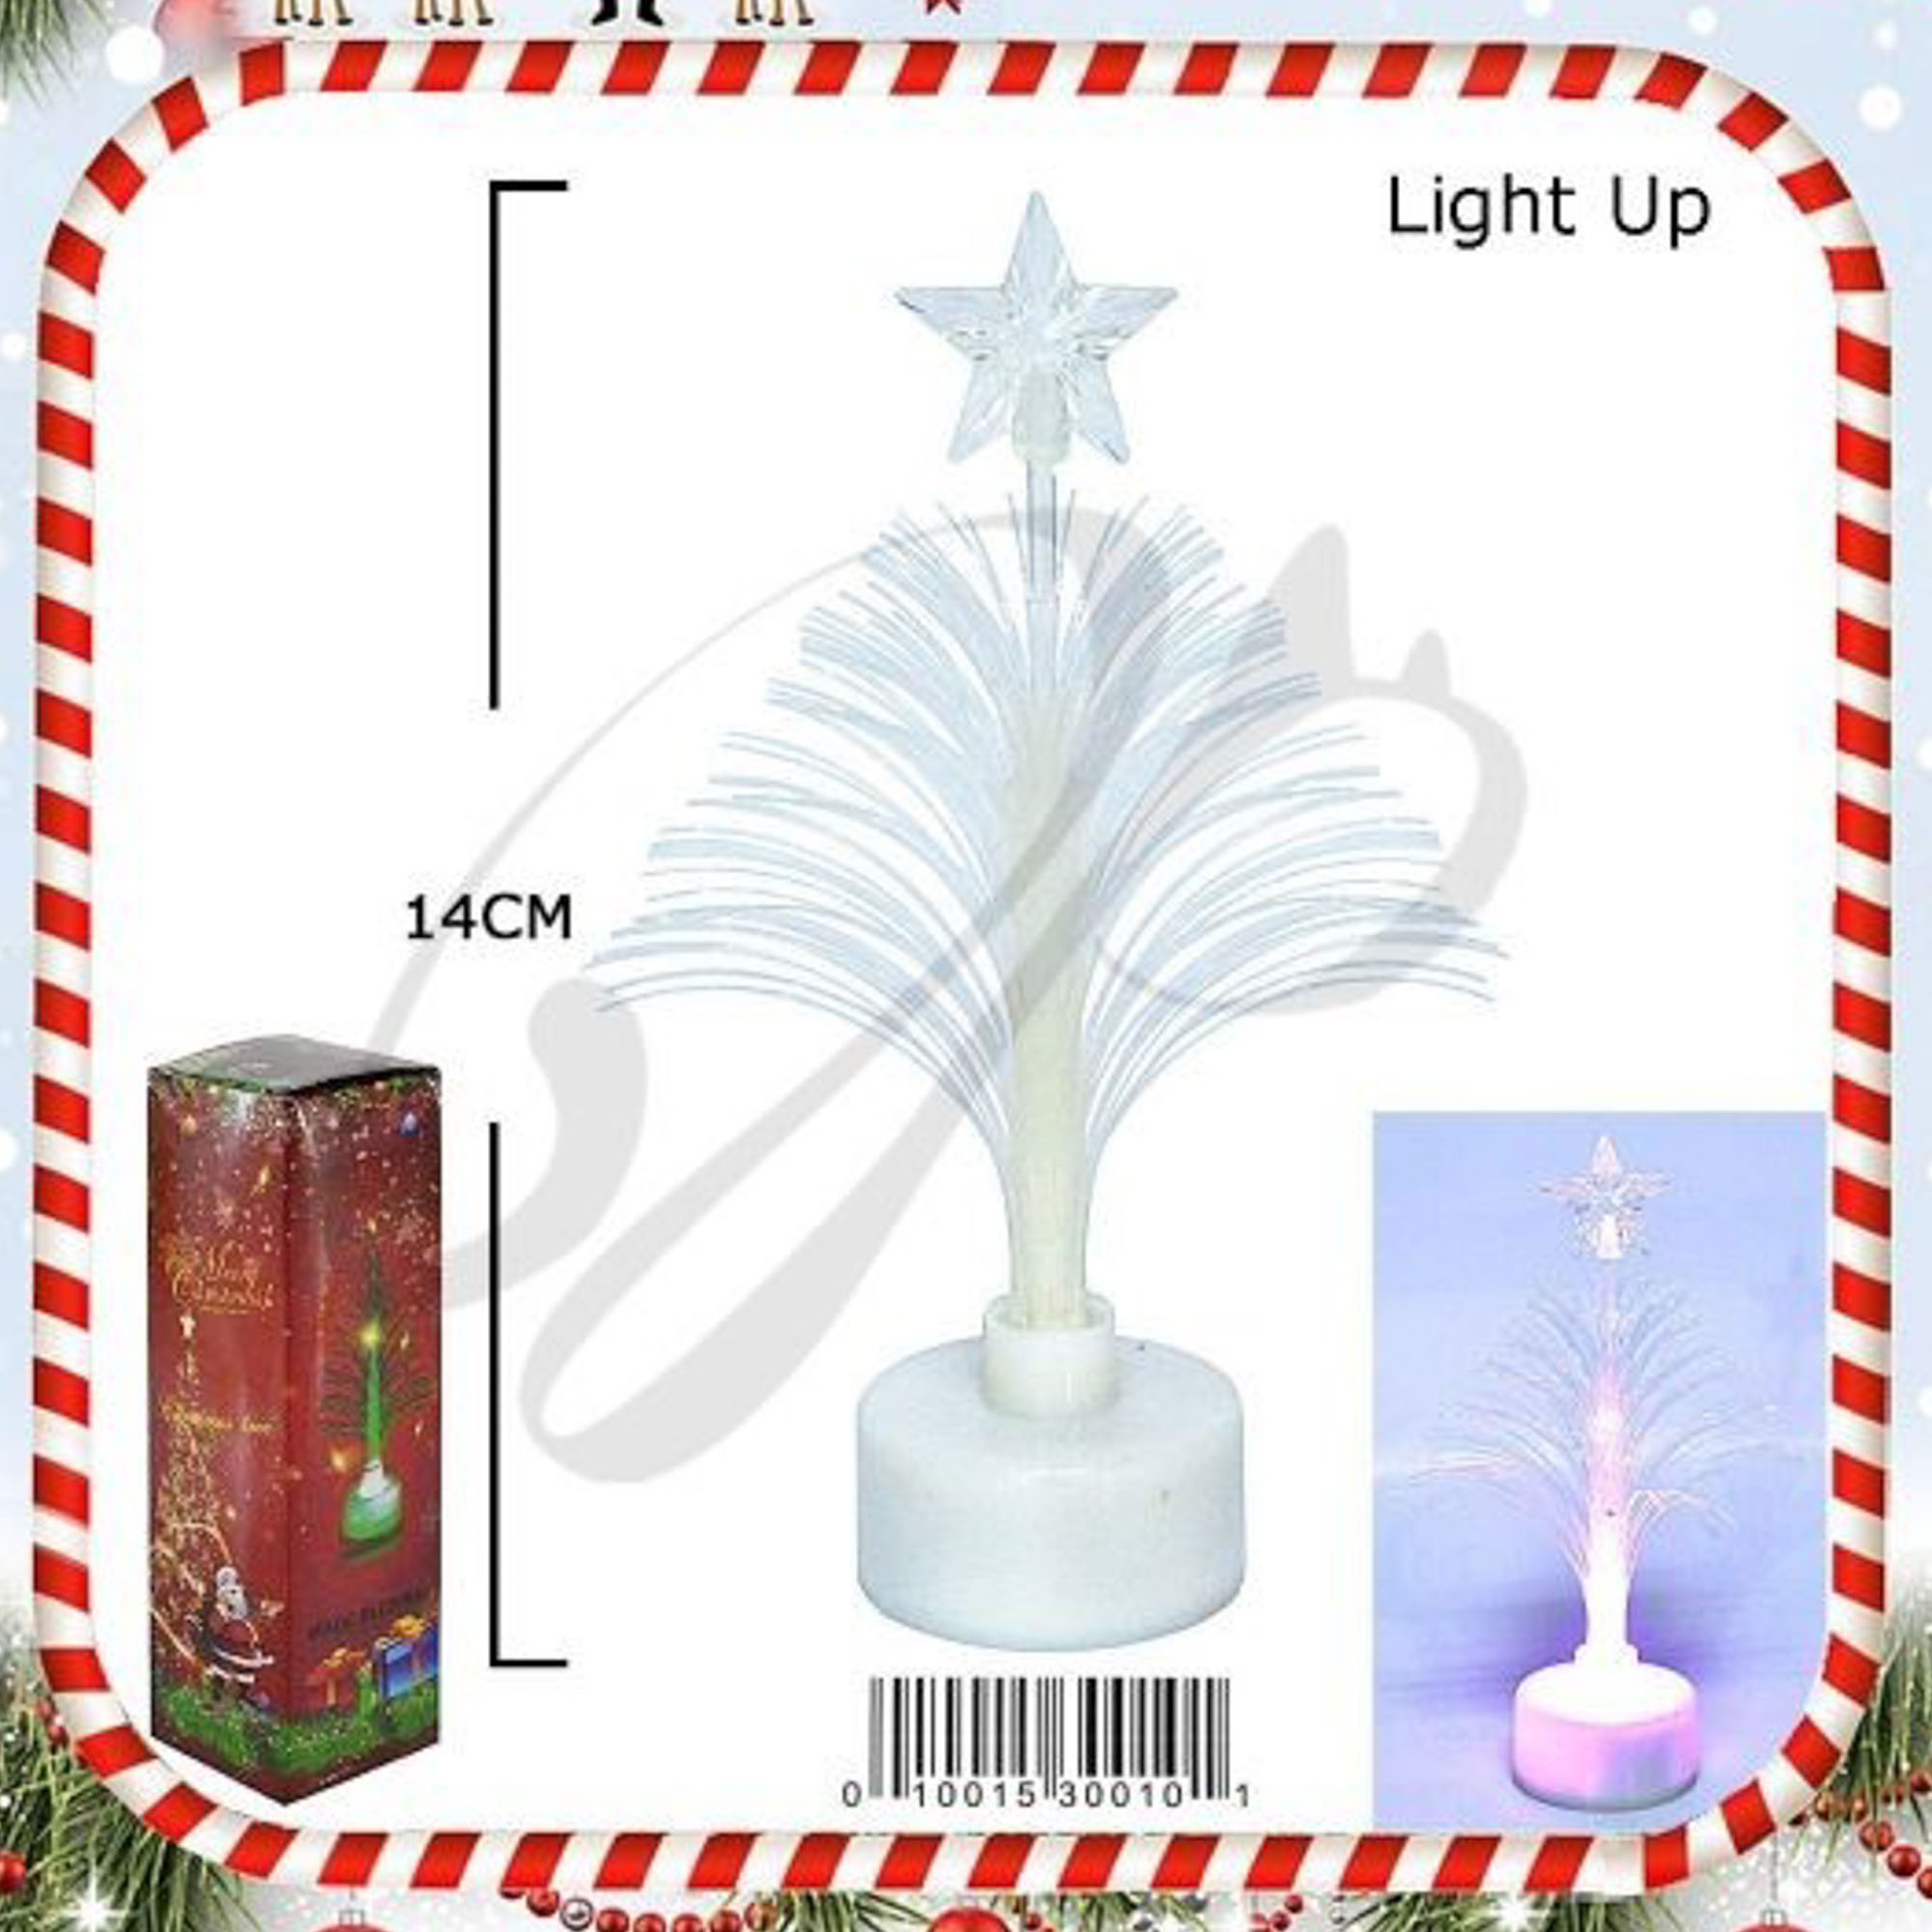 CHRISTMAS LED LIGHT MULTICOLOR FIBER OPTIC LED CHRISTMAS TREE WITH STAND HOME PARTY XMAS DECORATION